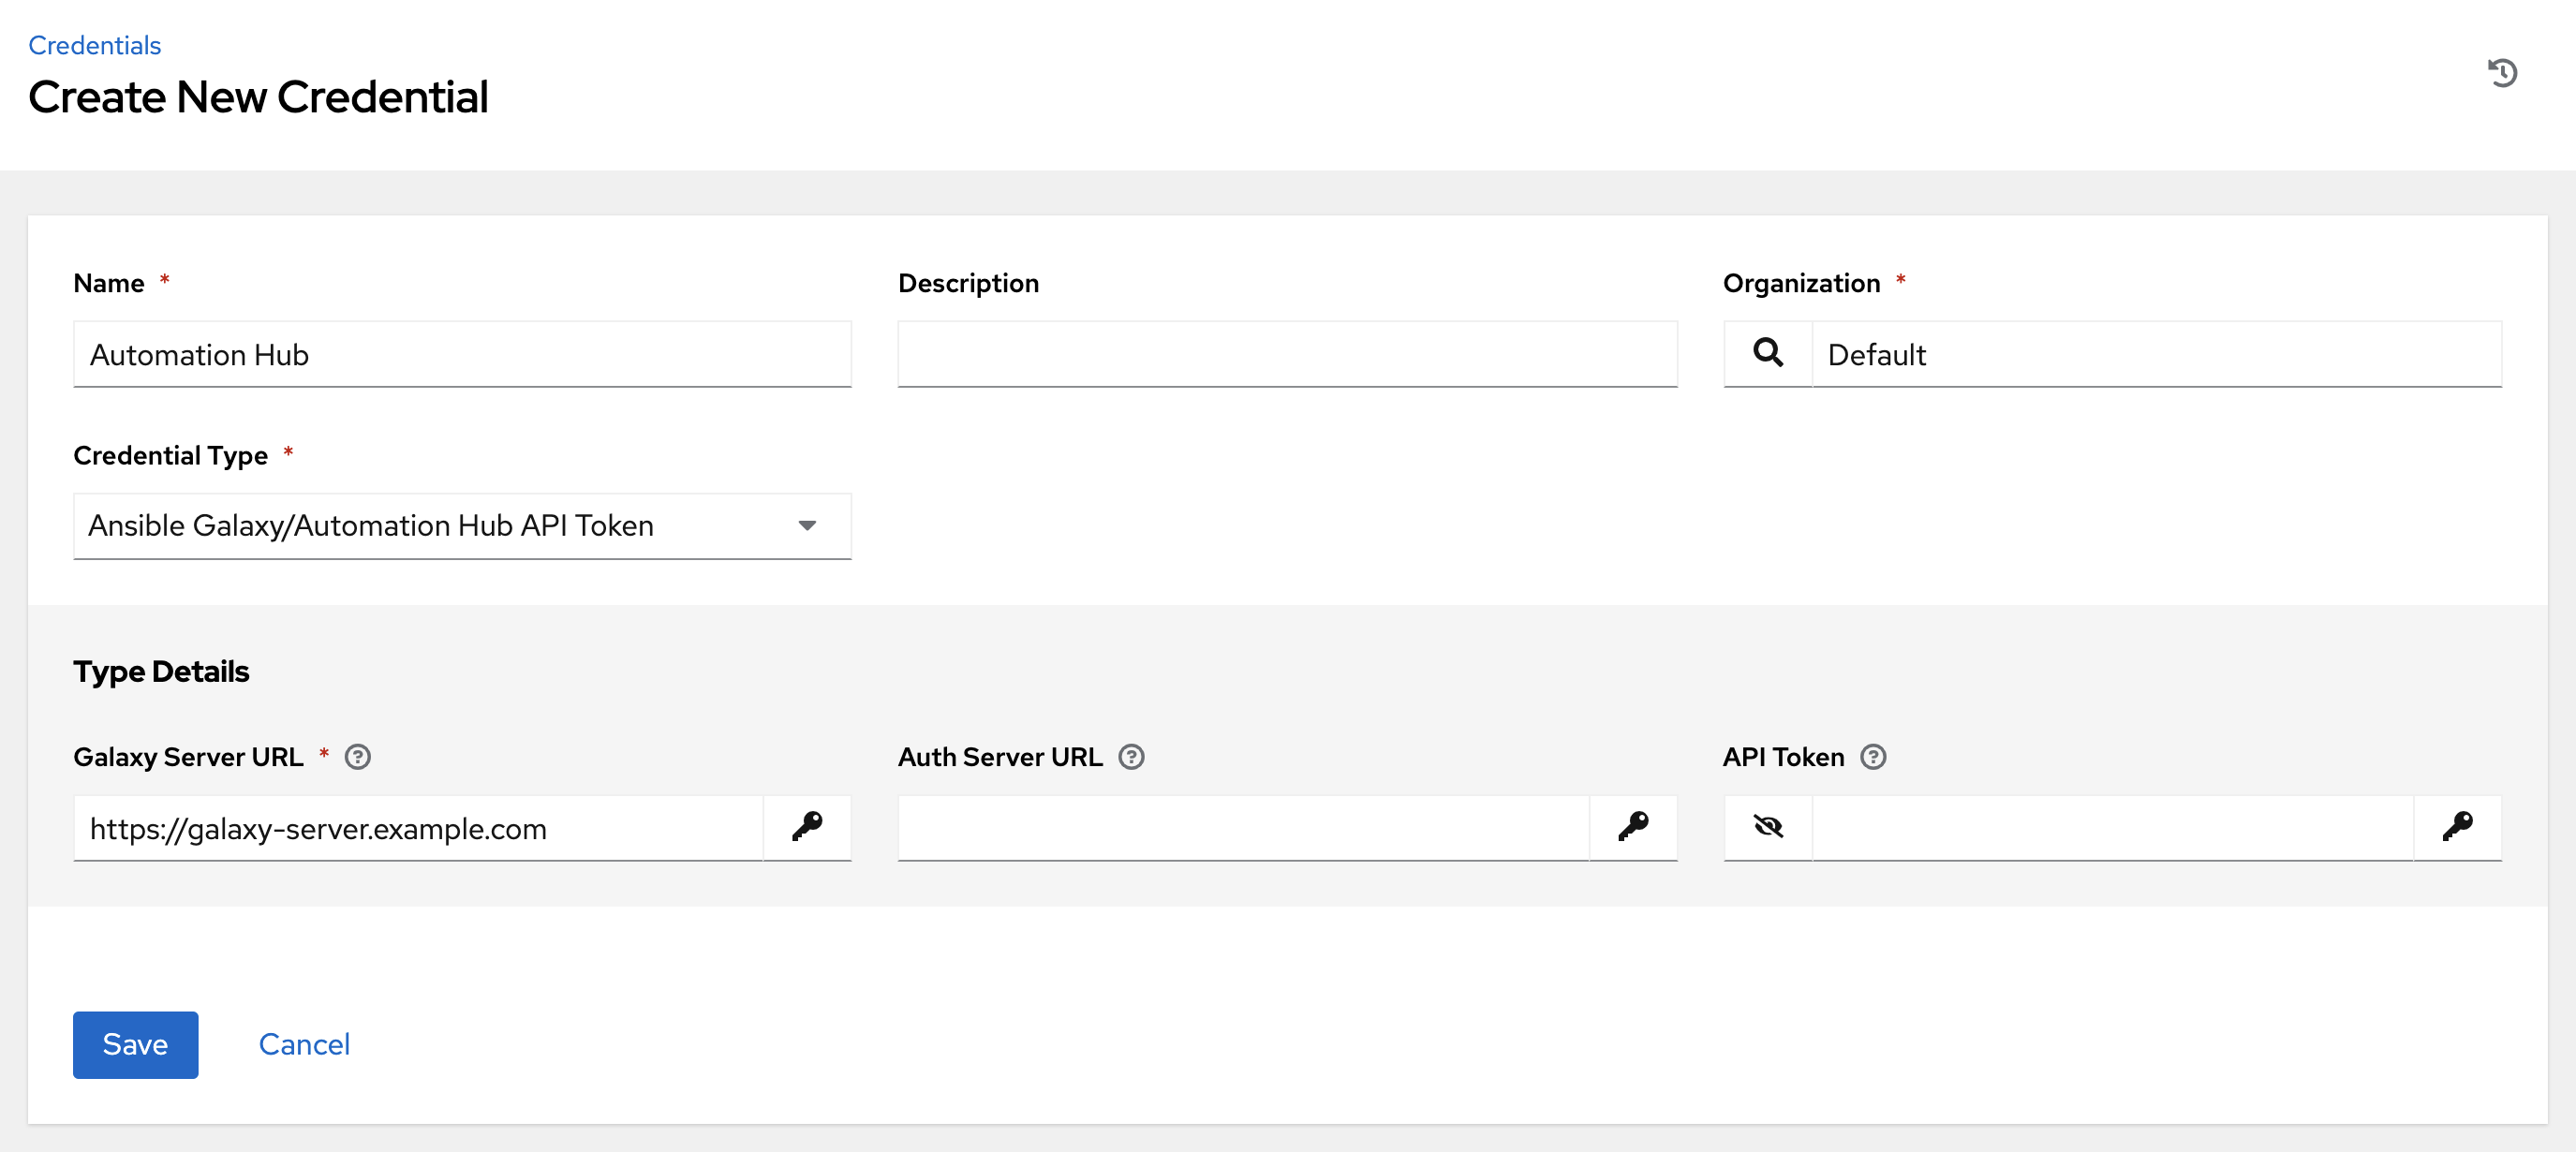 Create New Credential form for Ansible Galaxy/Automation Hub API Token Credential Type.